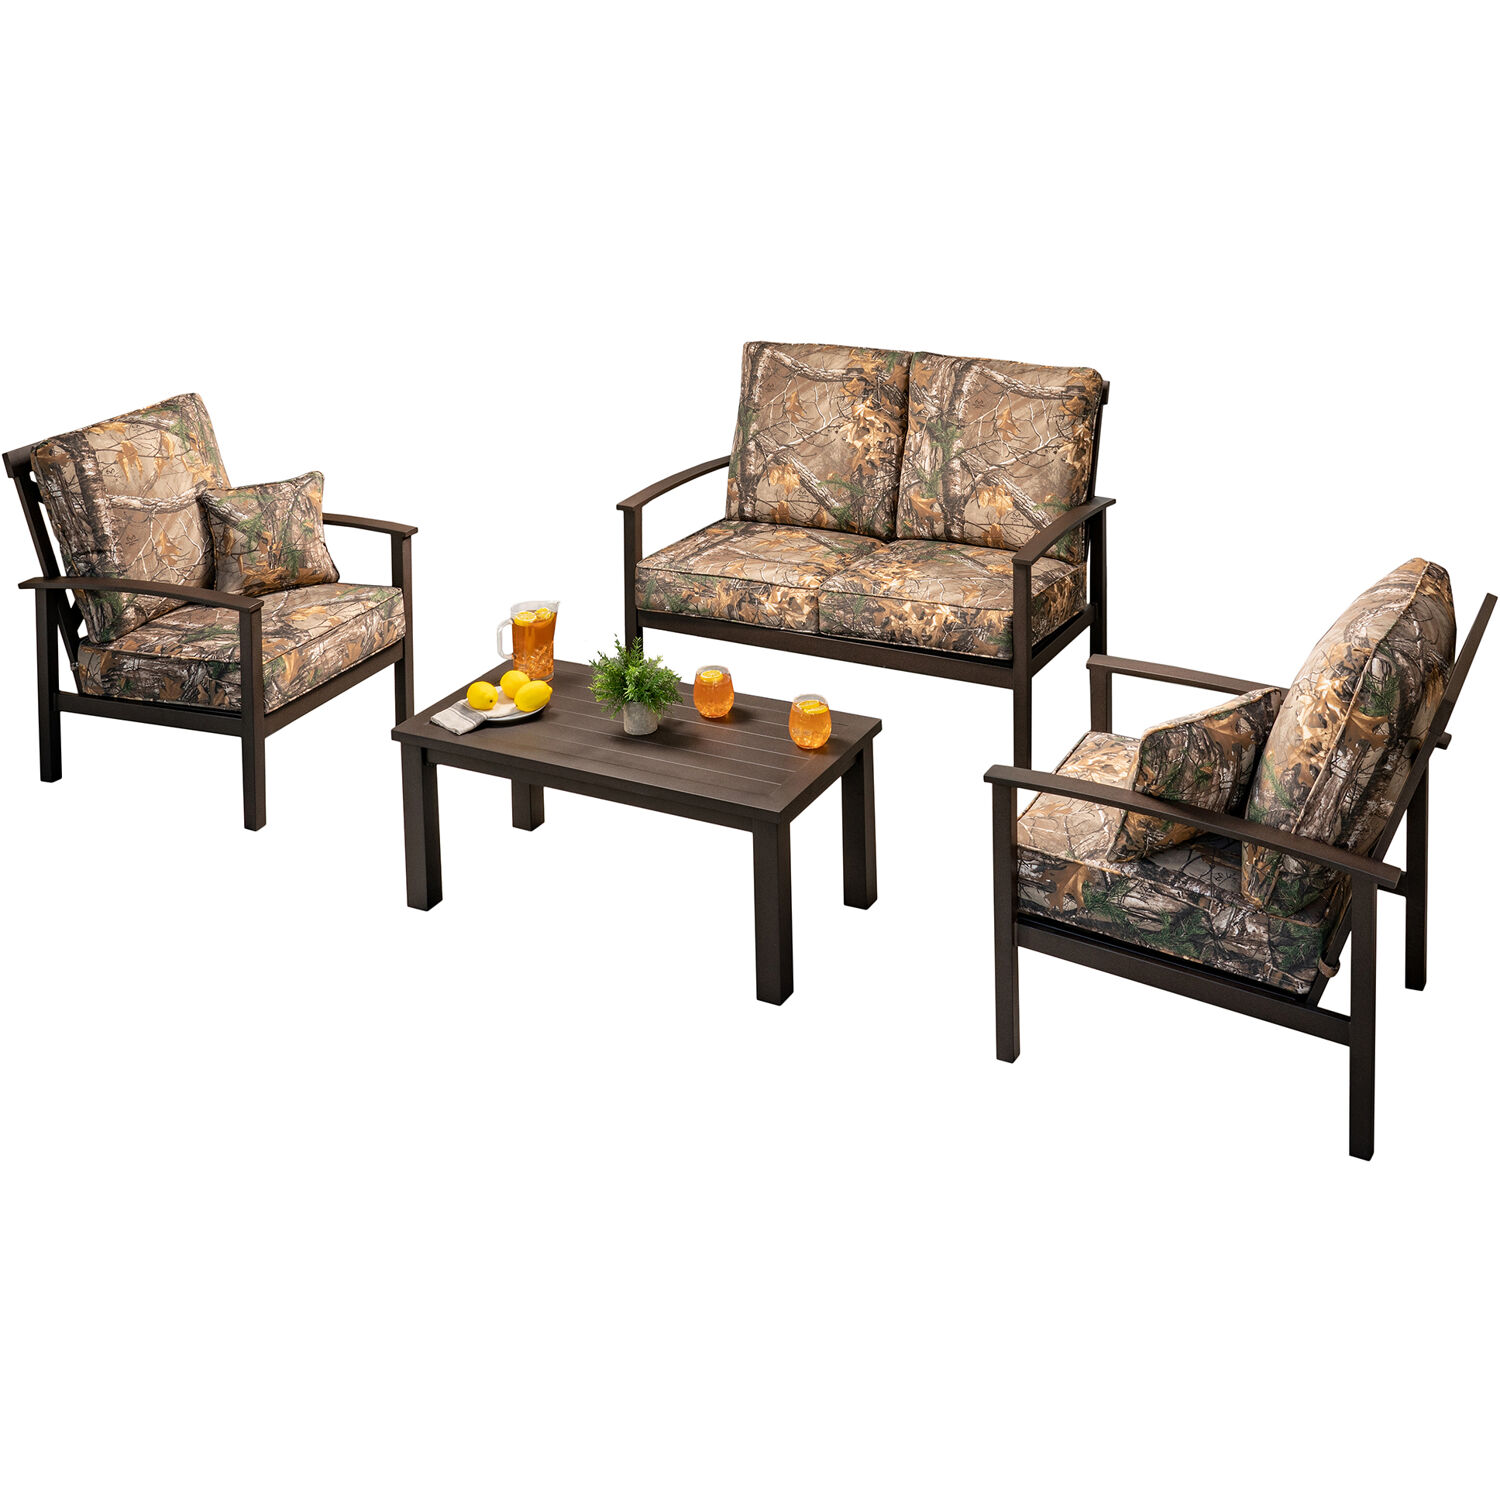 Hanover Cedar Ranch 4-Piece Outdoor Patio Furniture Set, 2 Deep Seating Chairs, Loveseat, and Coffee Table, Thick RealTree Printed Camo Cushions, CDRN - image 1 of 10